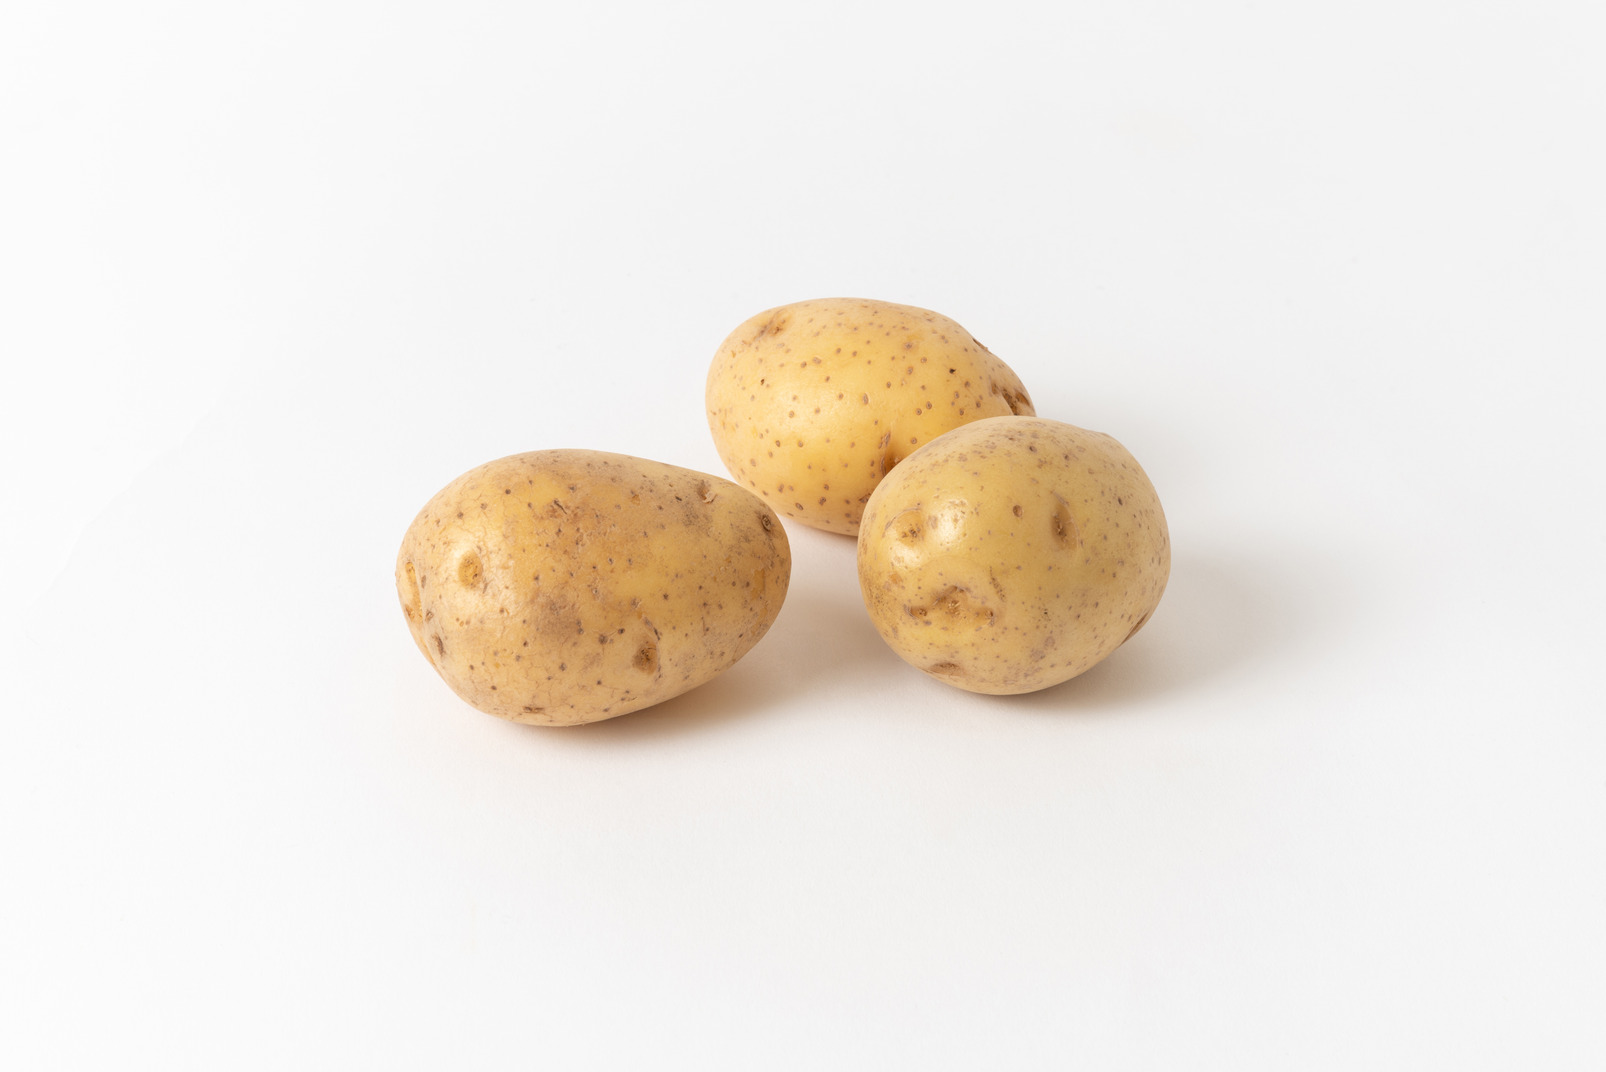 Potatoes are great for your skin health